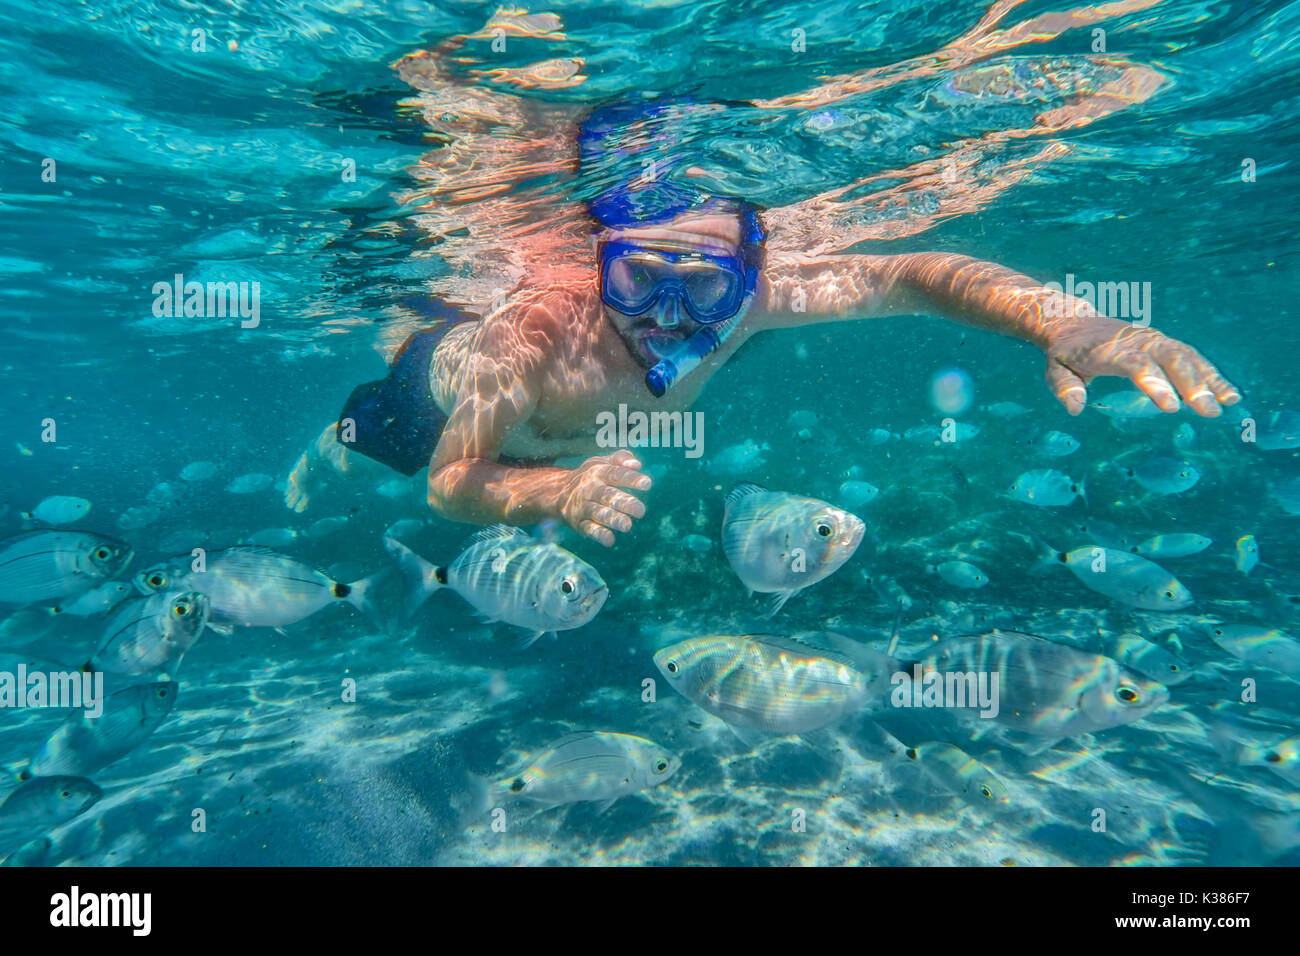 Young man snorkeling in underwater coral reef on tropical island. Stock Photo